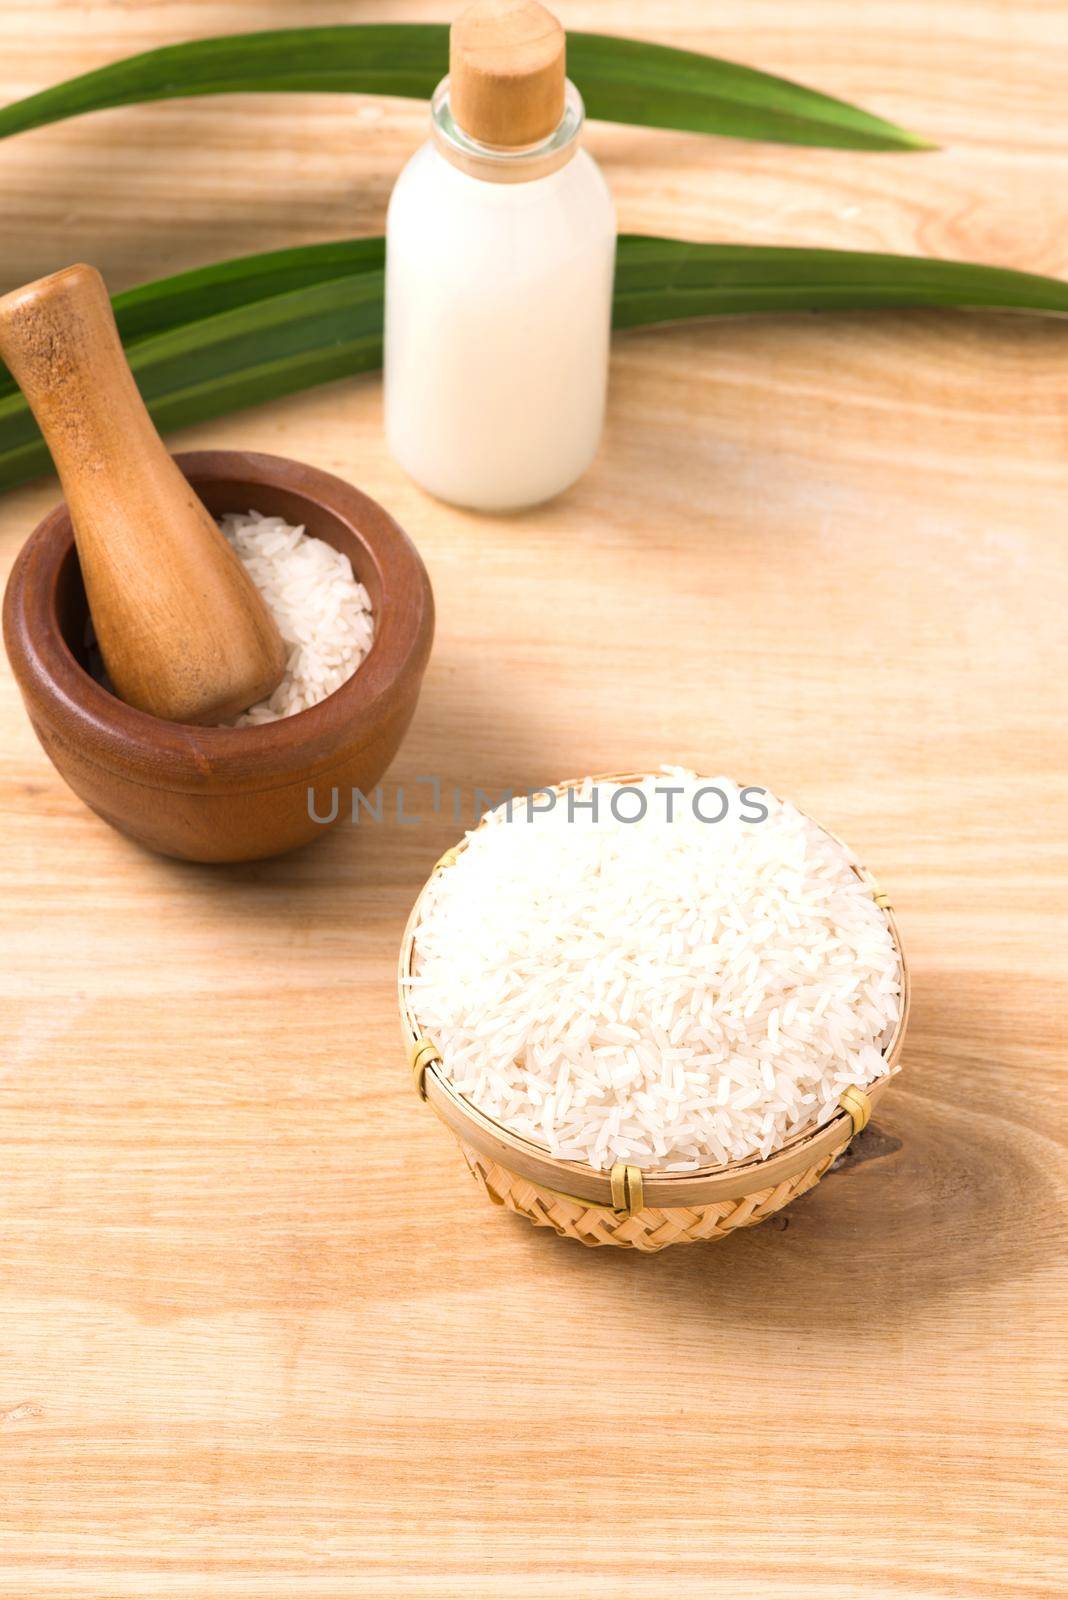 Rice milk and rice seeds on wooden table background.